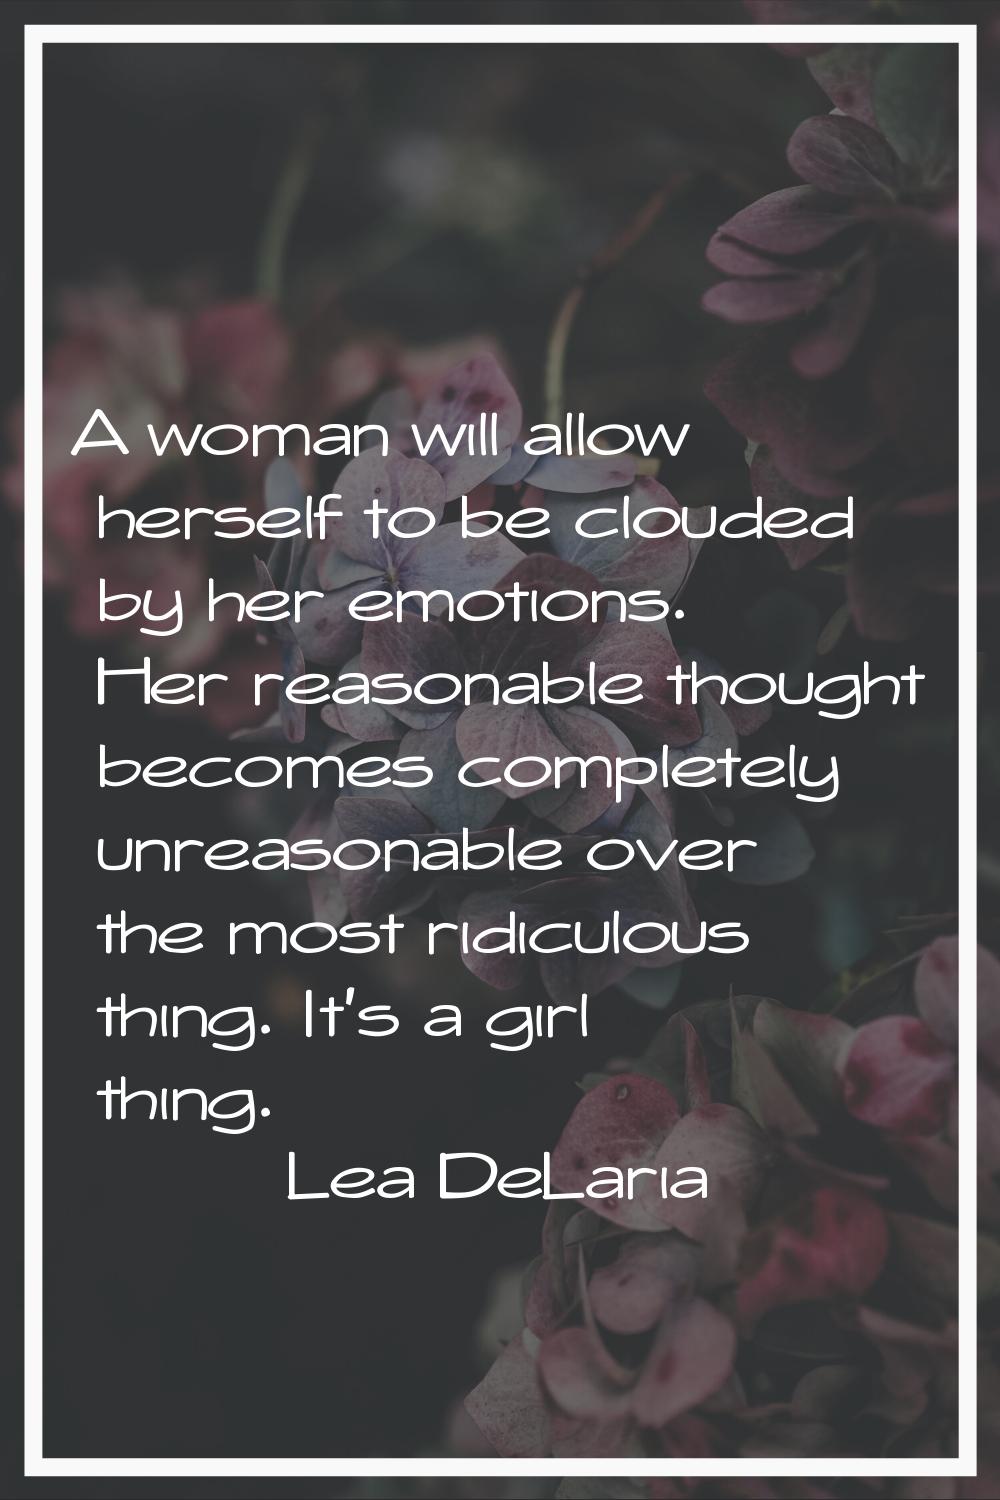 A woman will allow herself to be clouded by her emotions. Her reasonable thought becomes completely